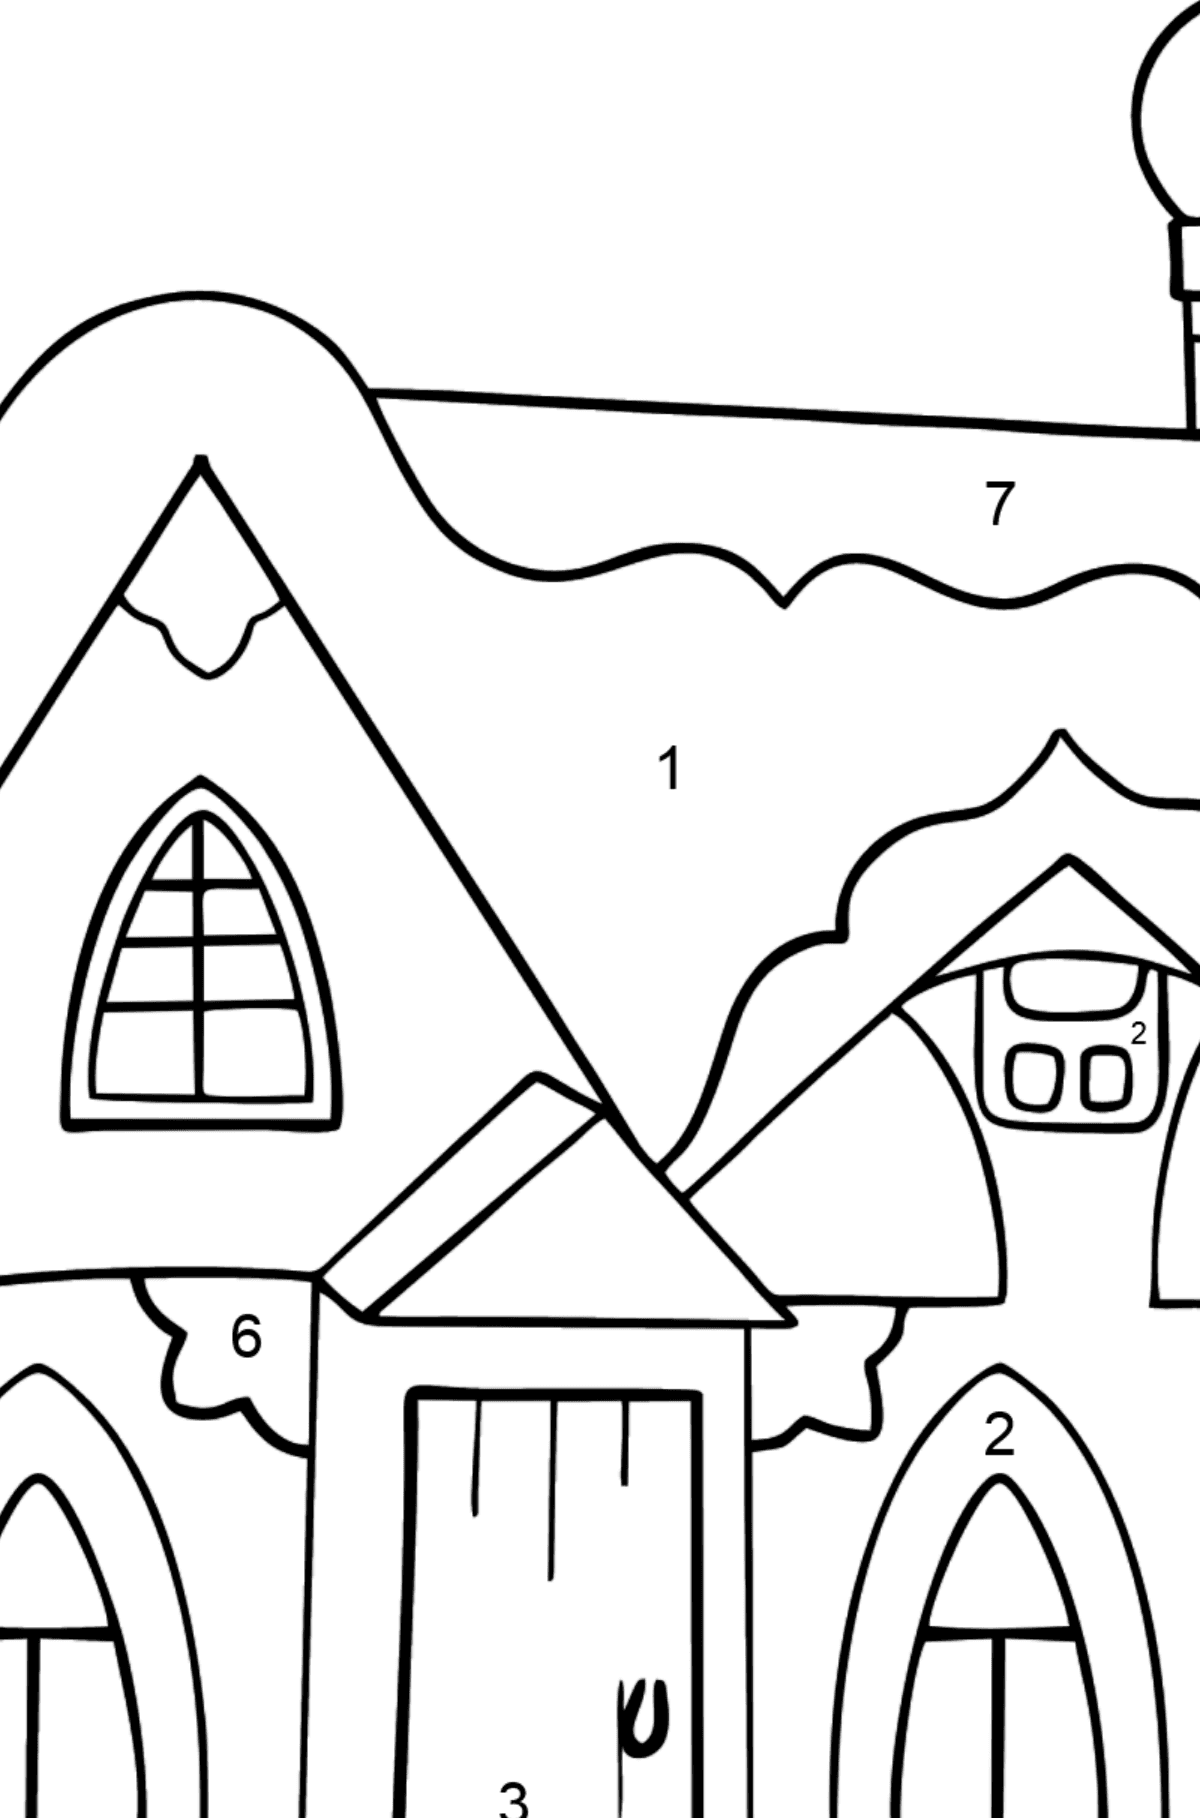 Simple Coloring Page - A Fairytale House - Coloring by Numbers for Kids